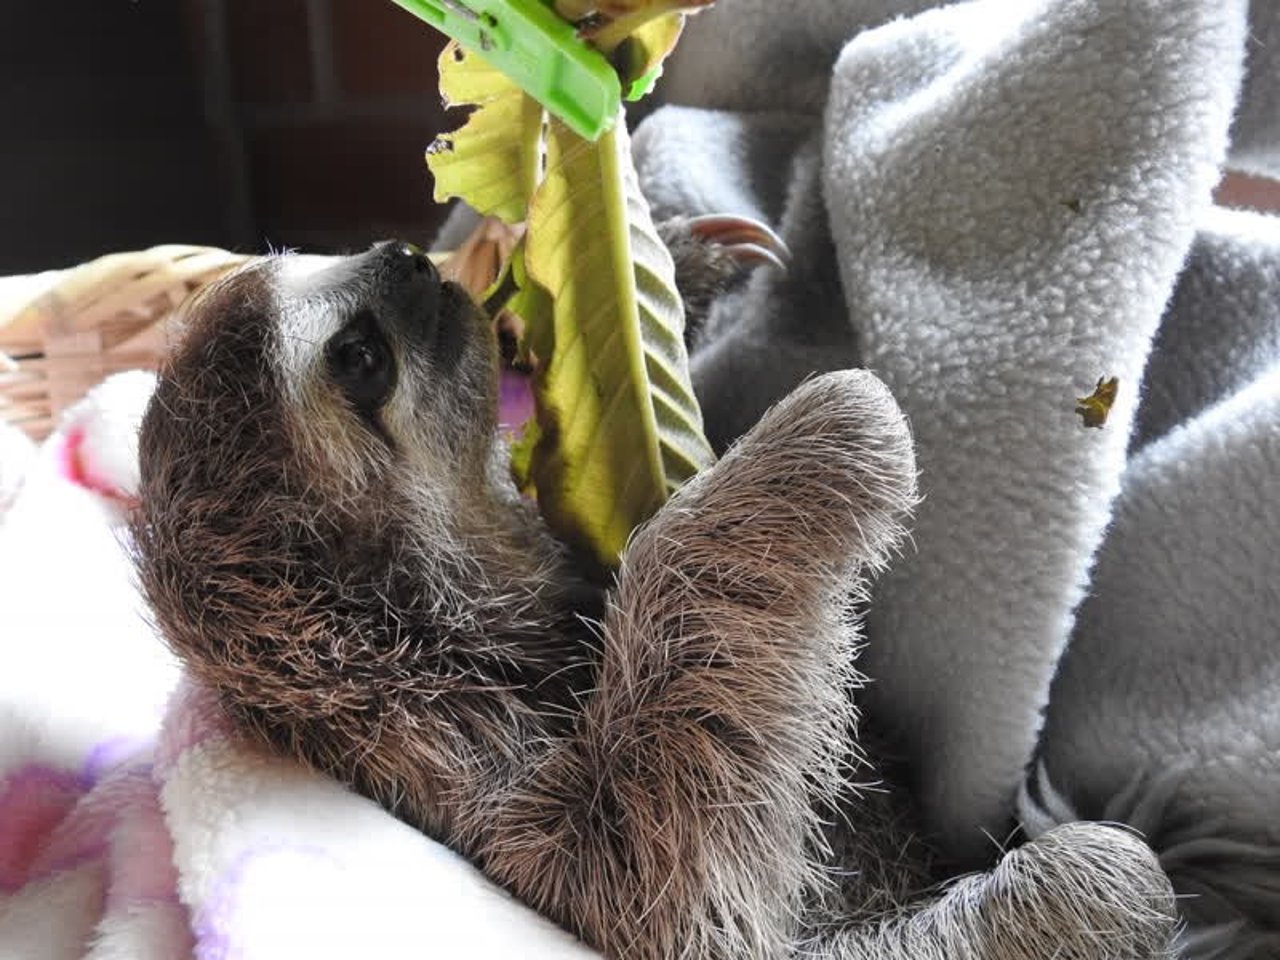 sloth_colombia_800x600_1021361_0